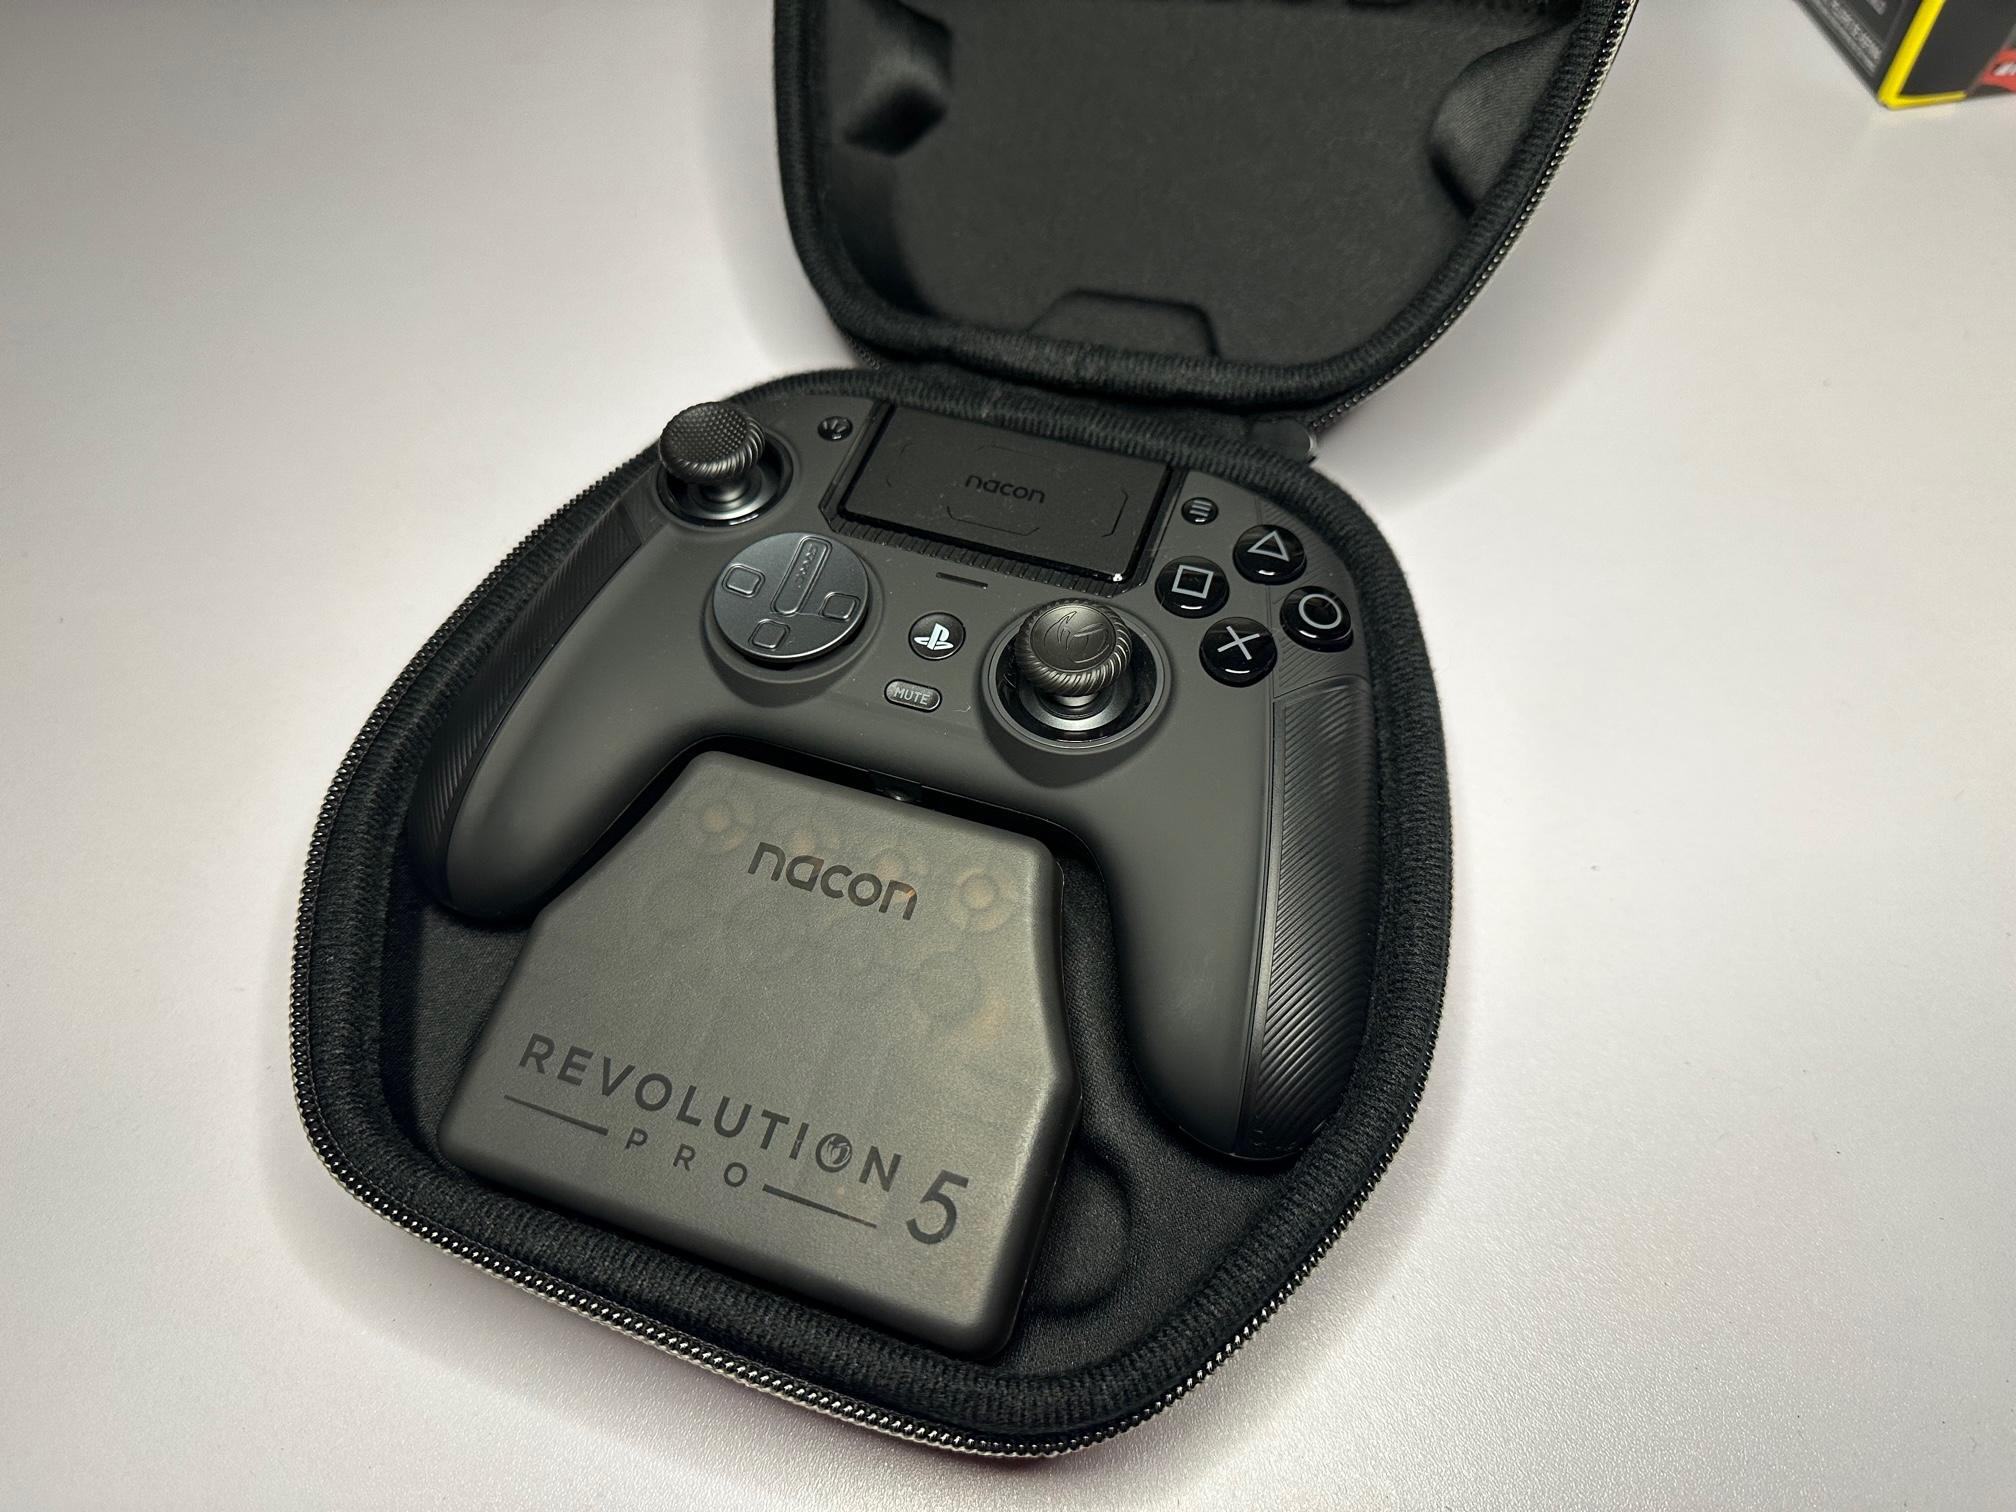 Picture of a black NACON PS5 Revolution Pro controller inside the case